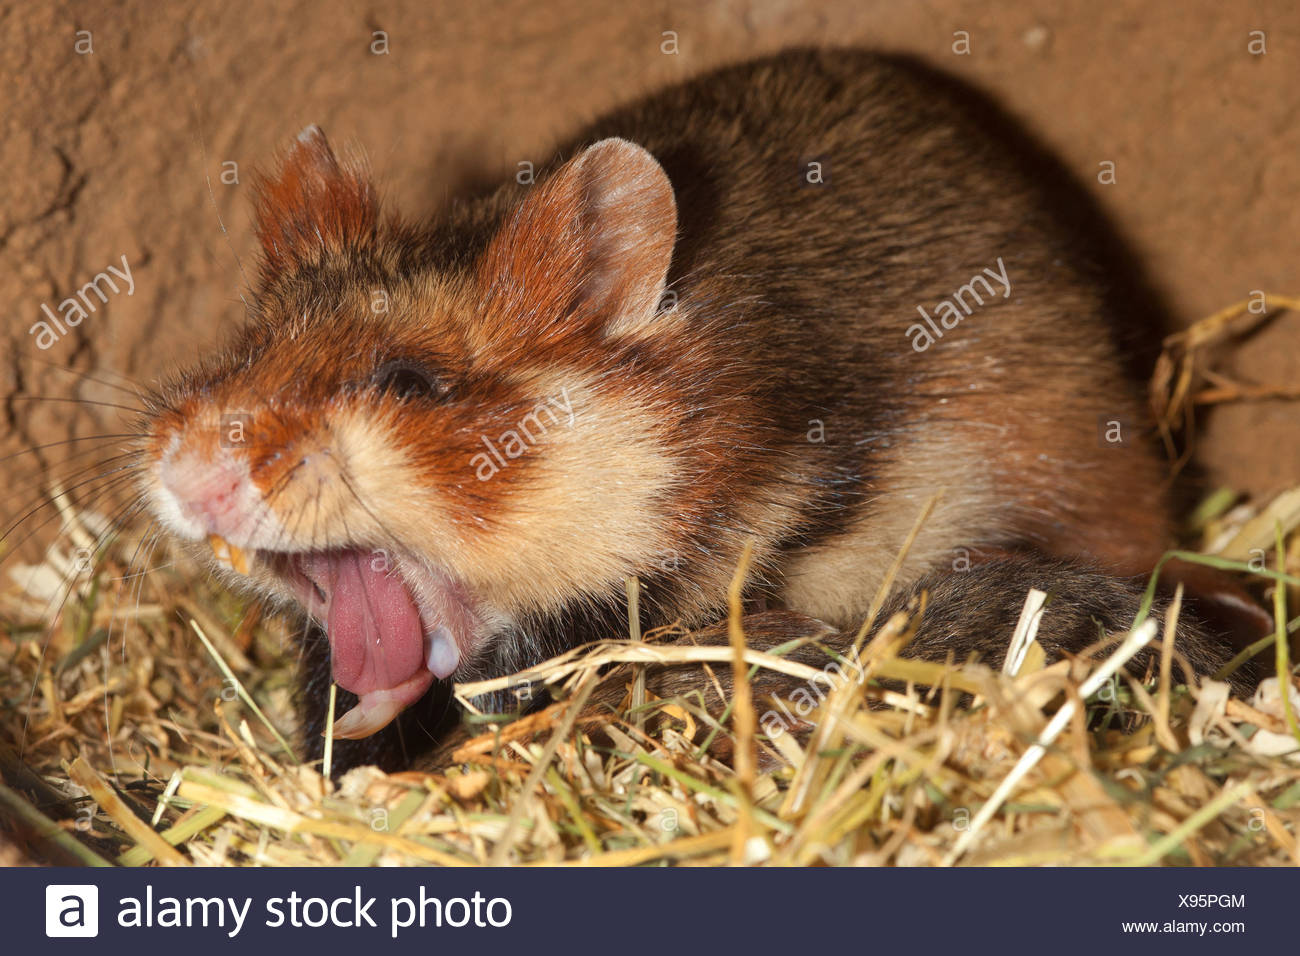 Common Hamster Black Bellied Hamster Cricetus Cricetus Yawning Female In Its Den Germany Stock Photo Alamy